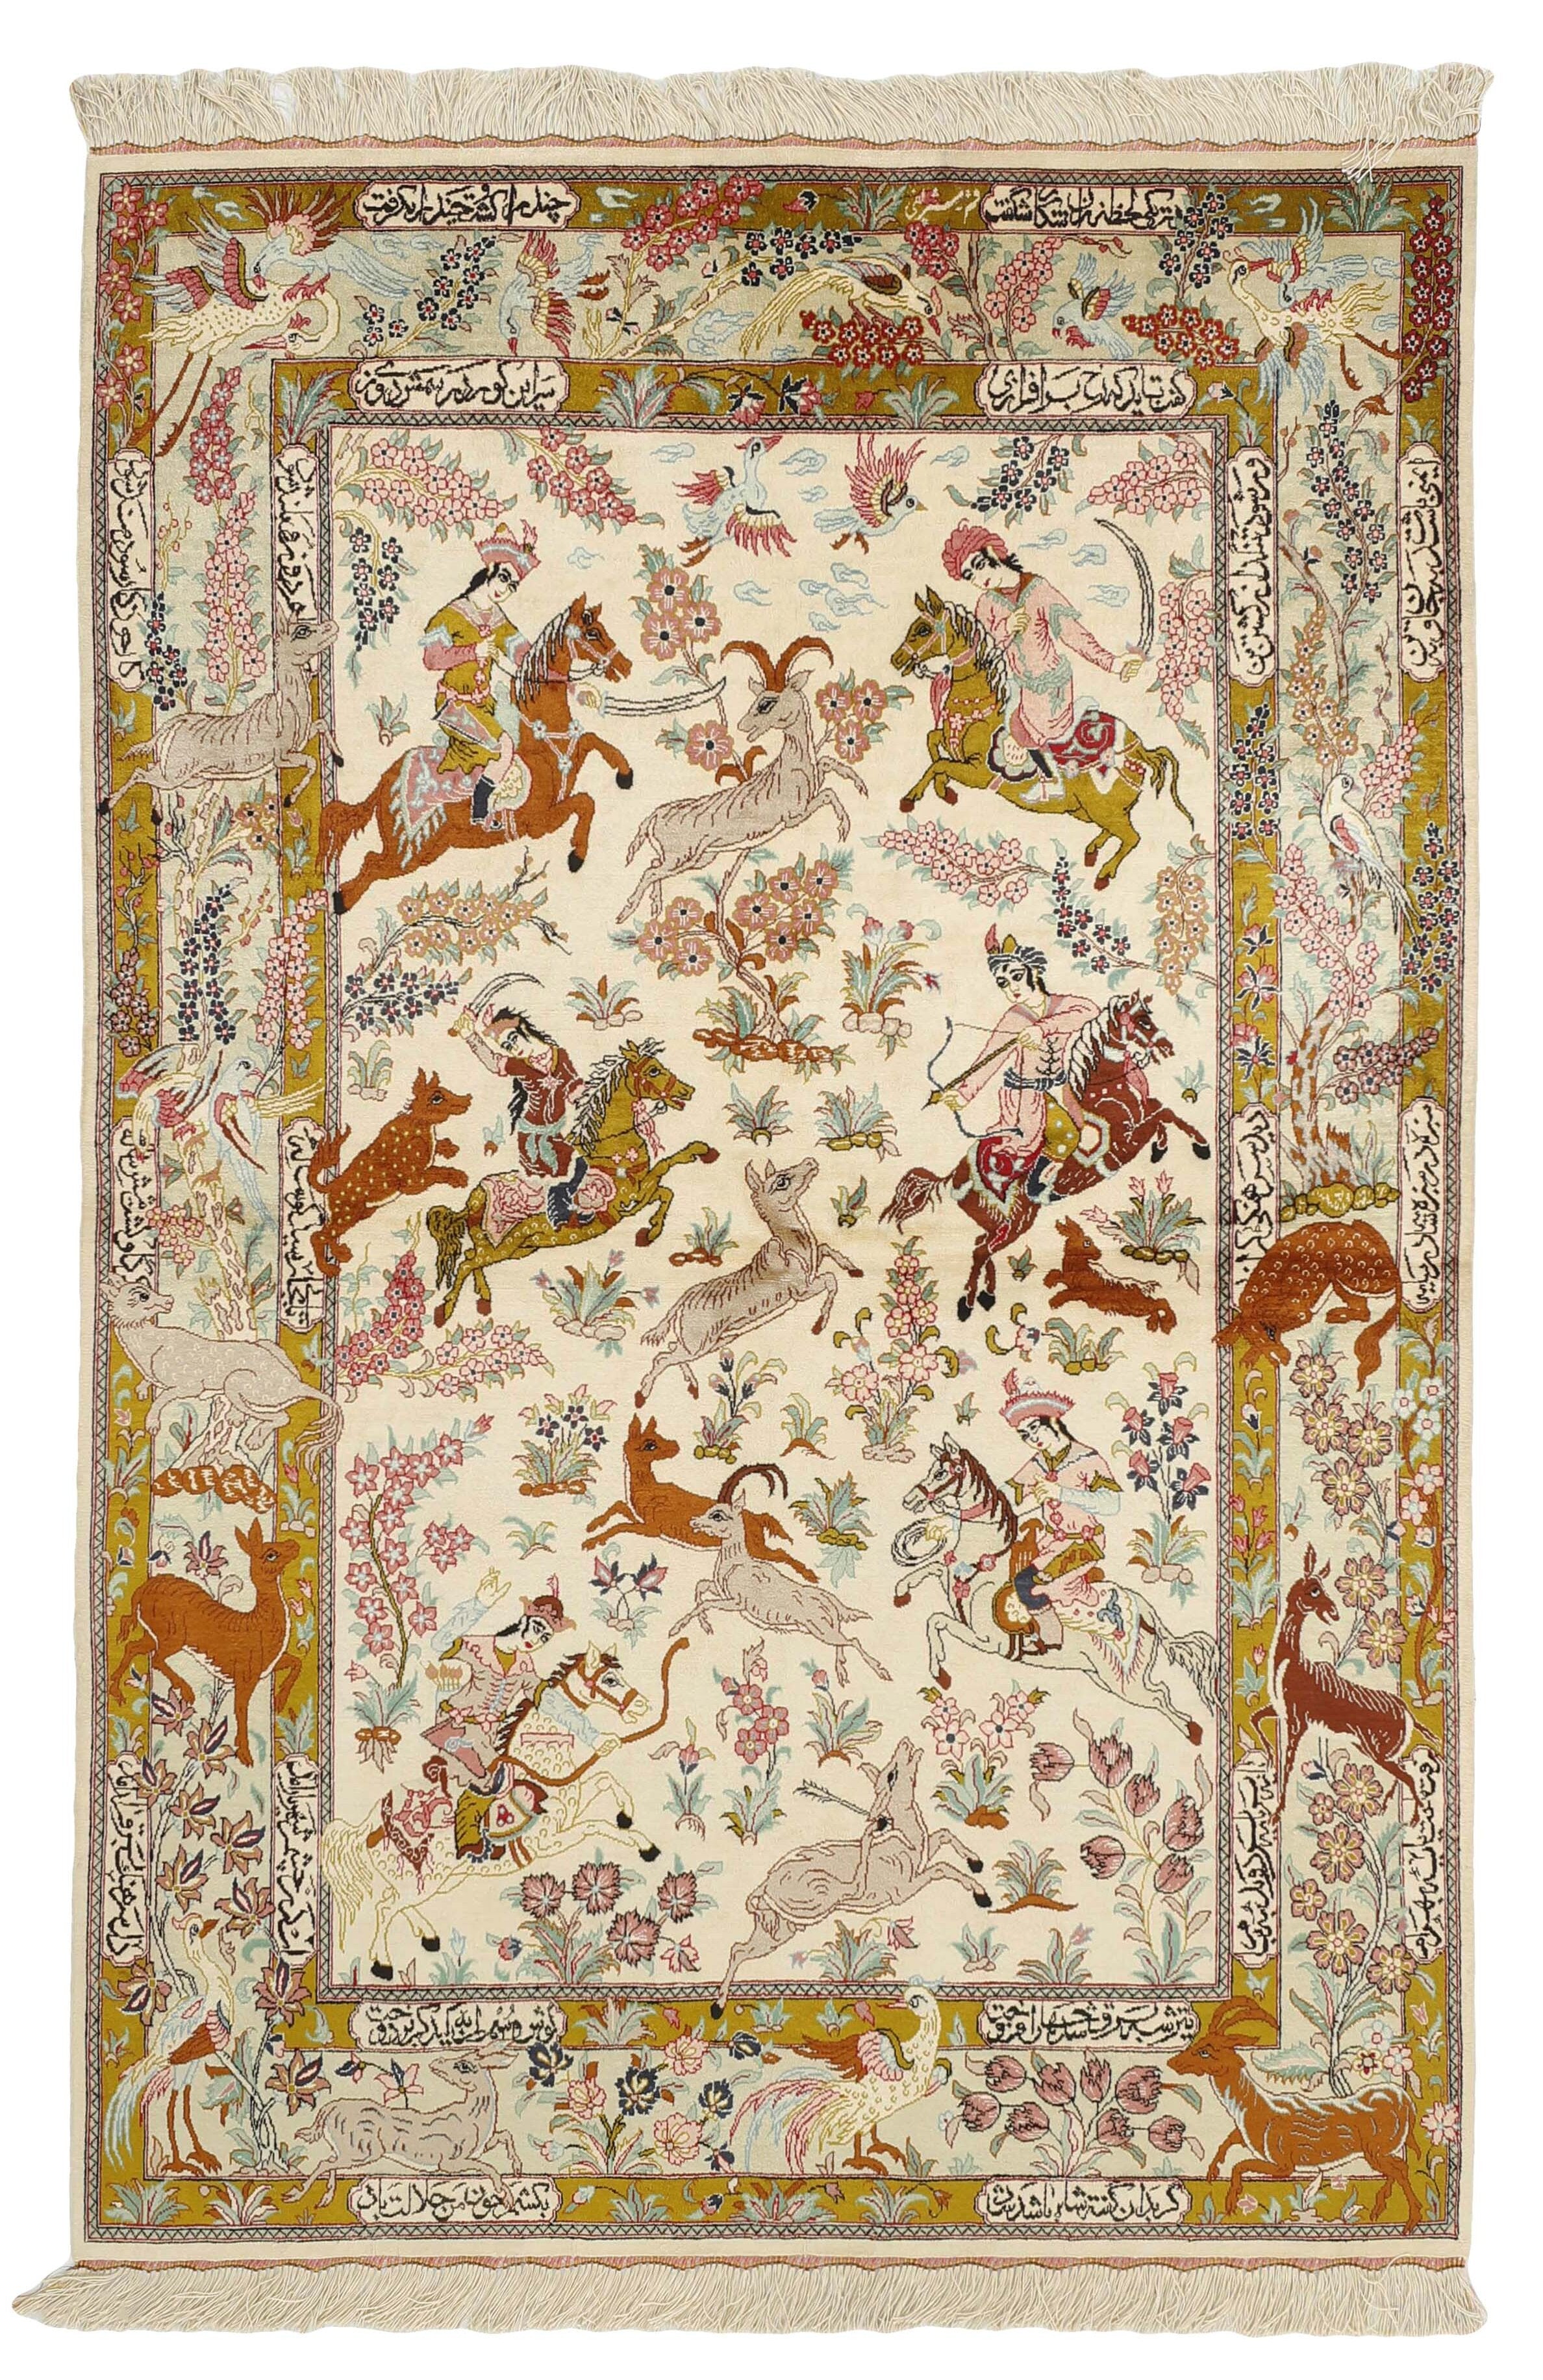 Authentic persian rug with a traditional floral design in red, pink, yellow, blue, green, beige, brown and black